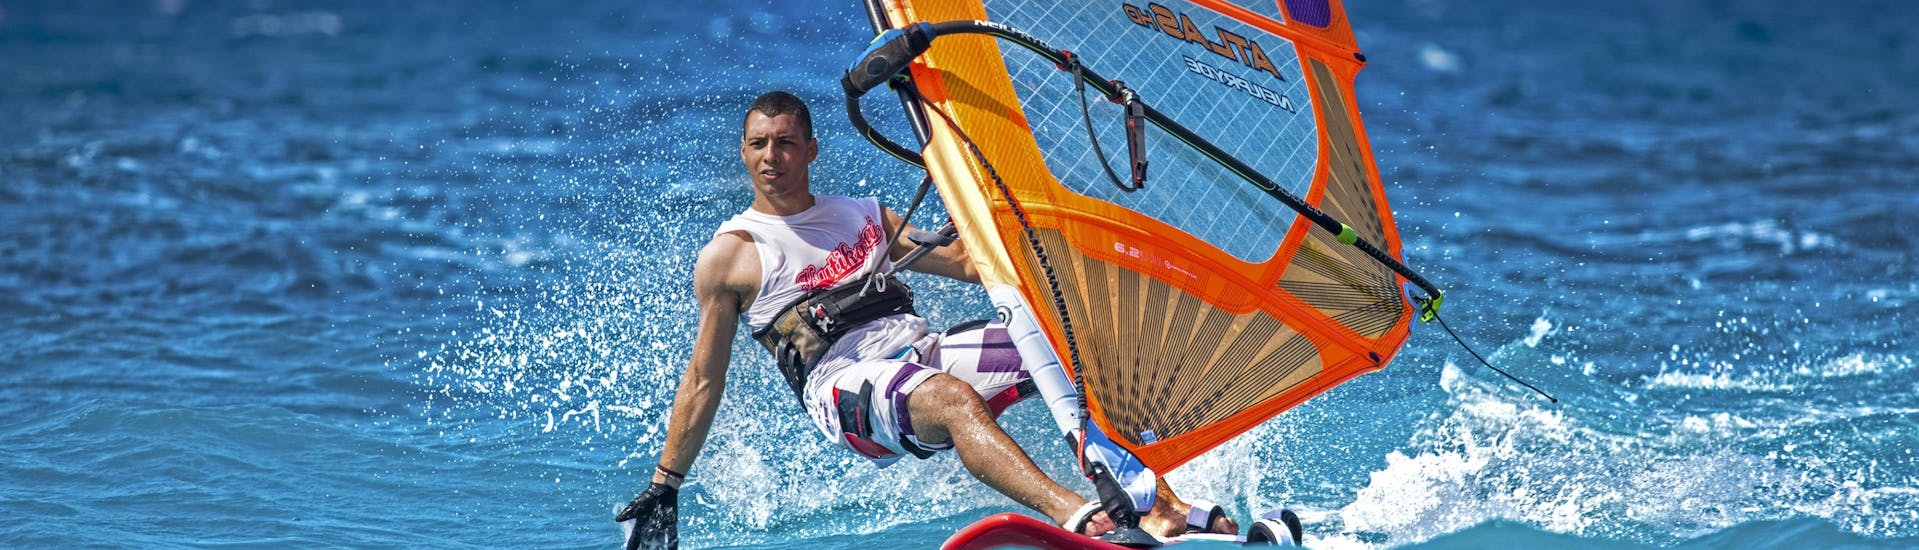 Private Windsurfing Lessons for Kids & Adults - Advanced with Windsurfers' World Rhodes.